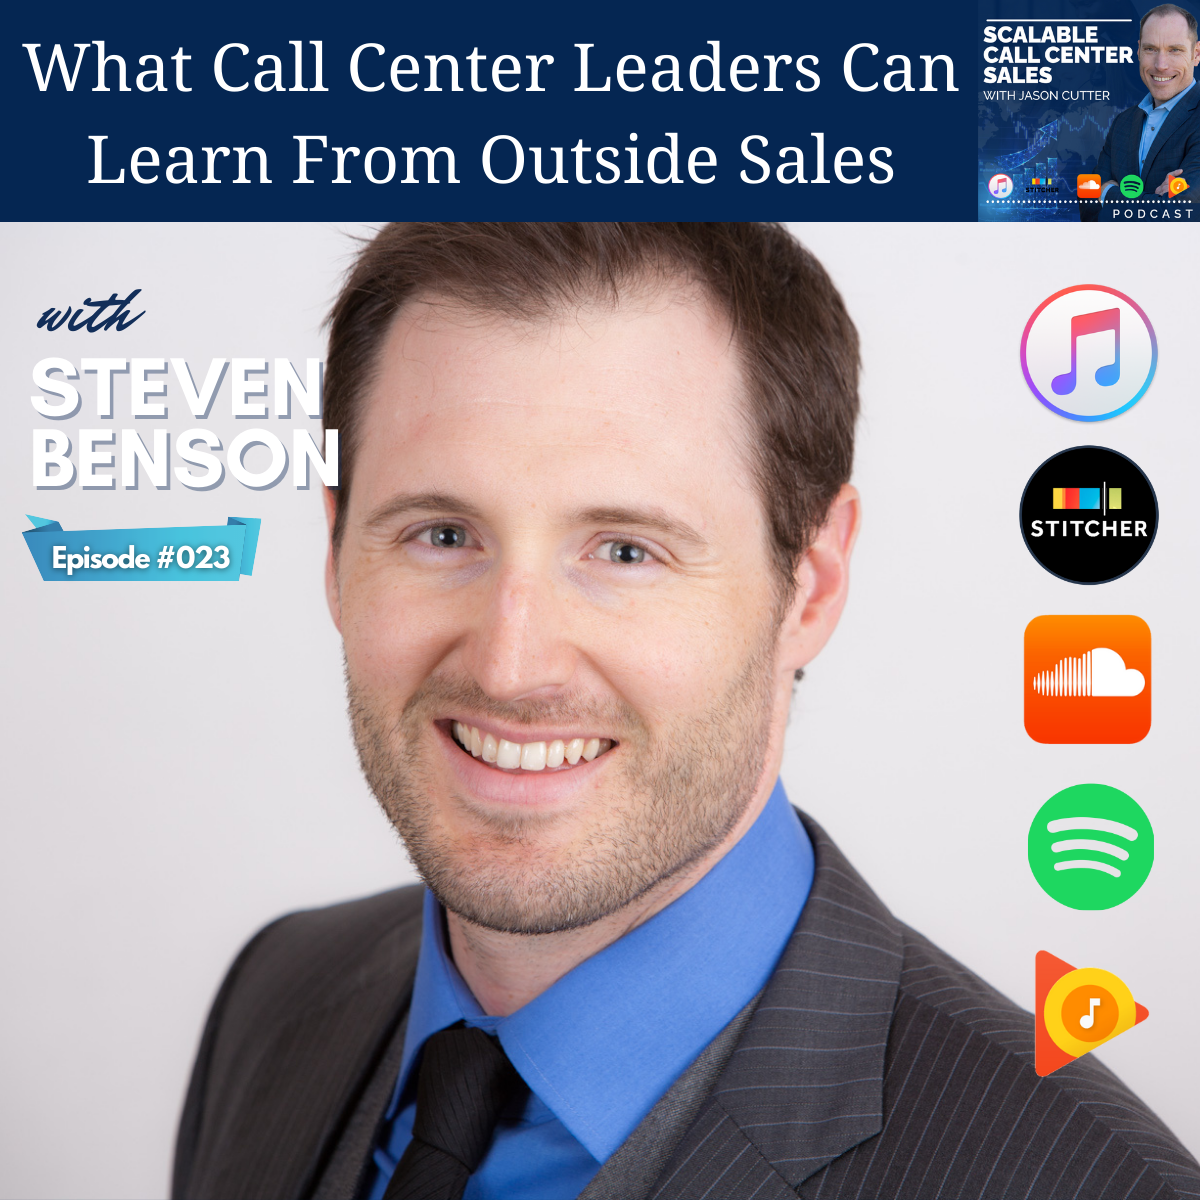 [023] What Call Center Leaders Can Learn From Outside Sales, with Steven Benson from Badger Maps